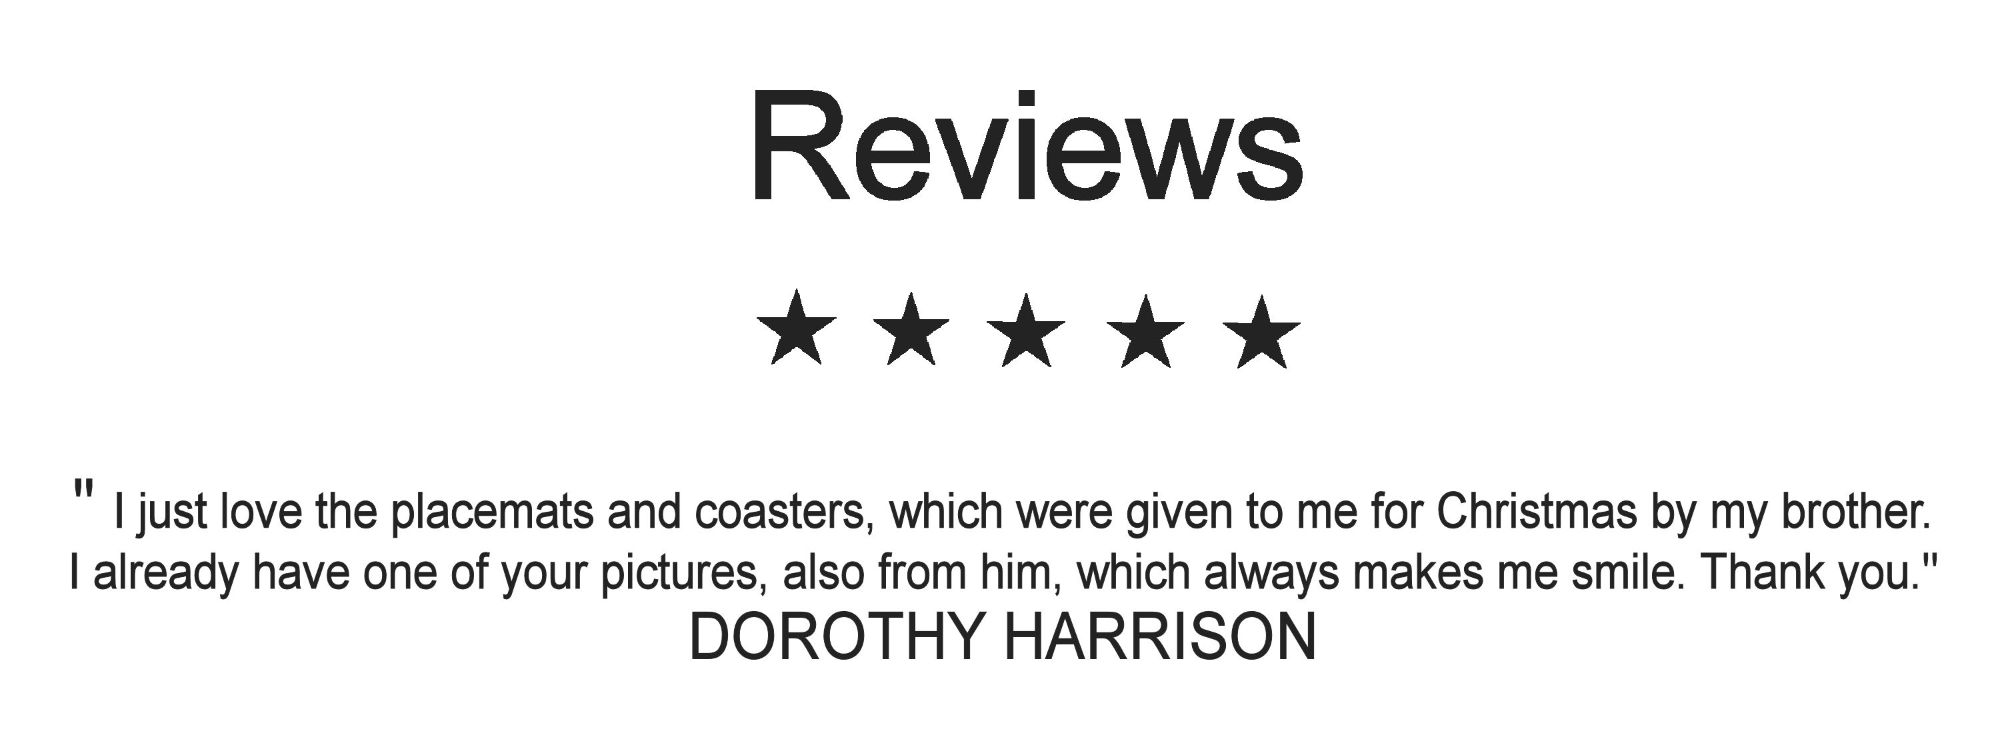 REview 3 Dorothy